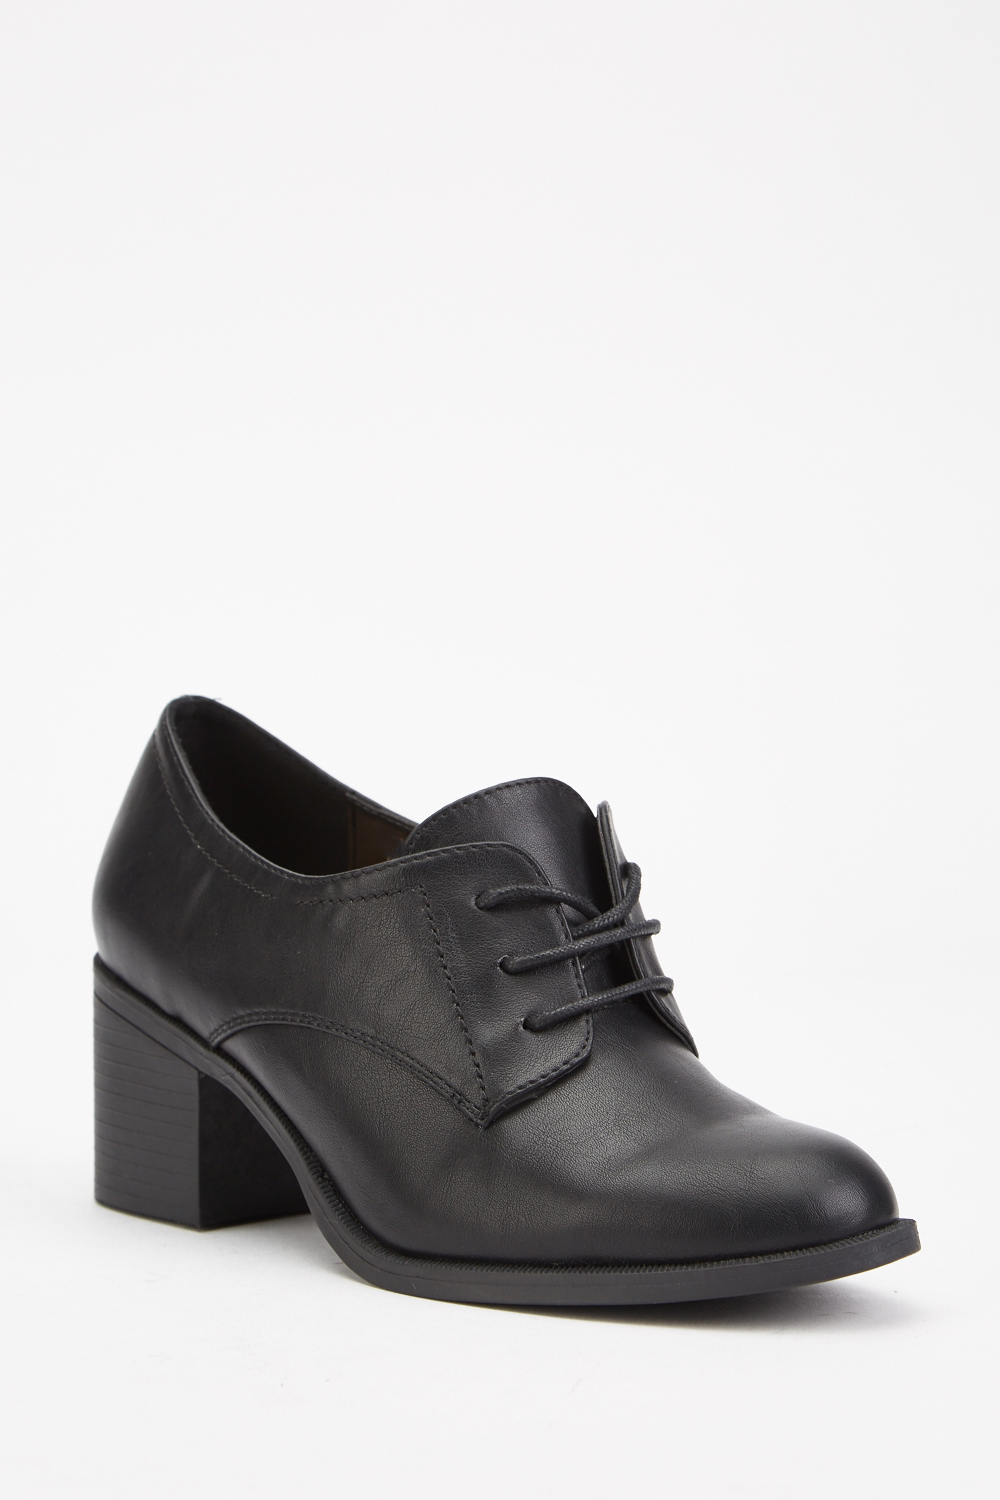 Lace Up Block Heel Oxford Shoes - Just $7